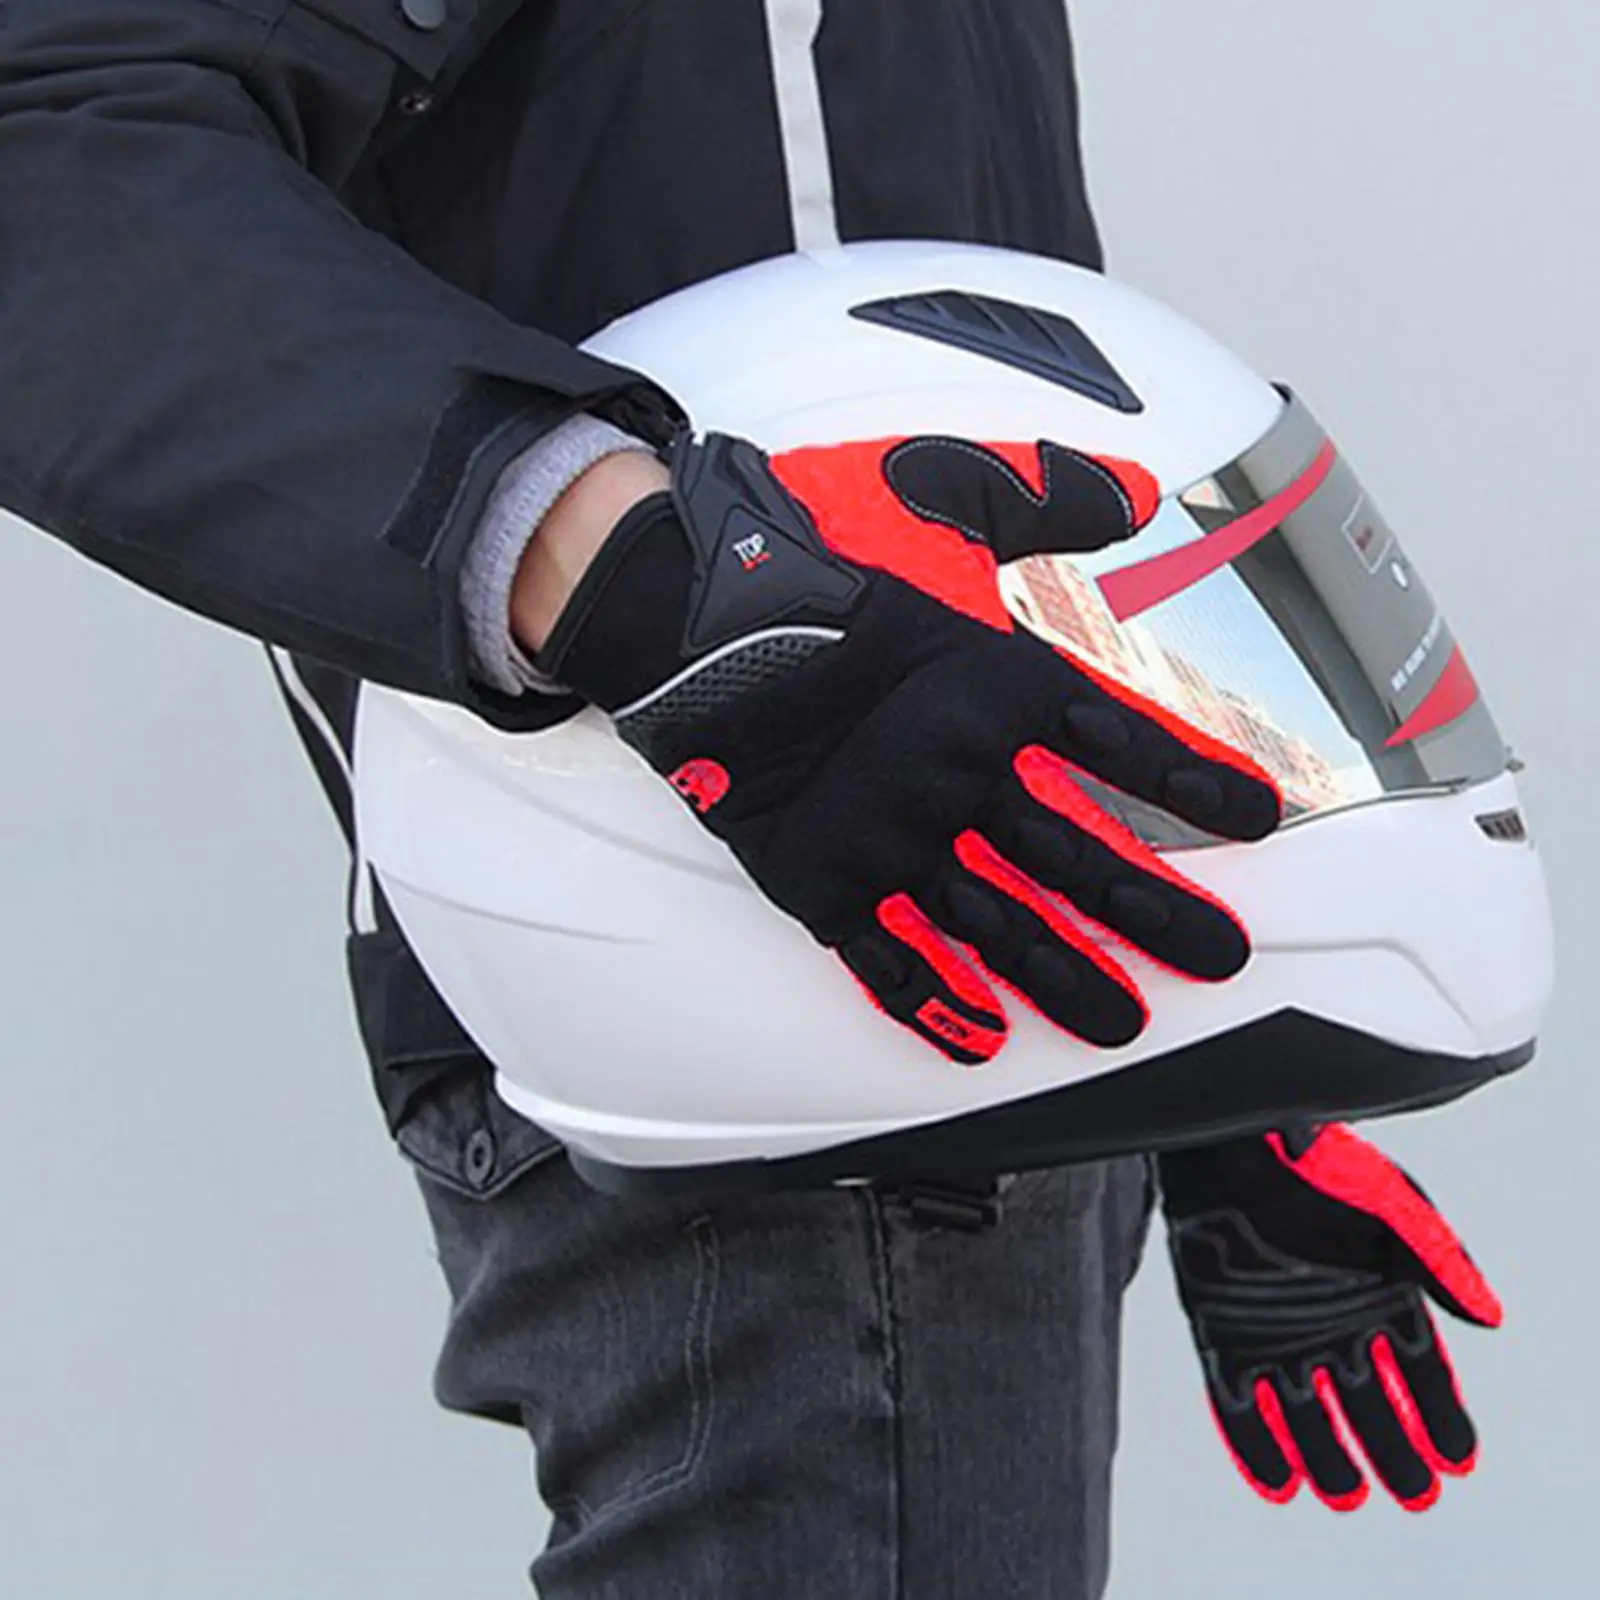 Motorcycle Motorbike Gloves Touchscreen Riding Protection for Men Women